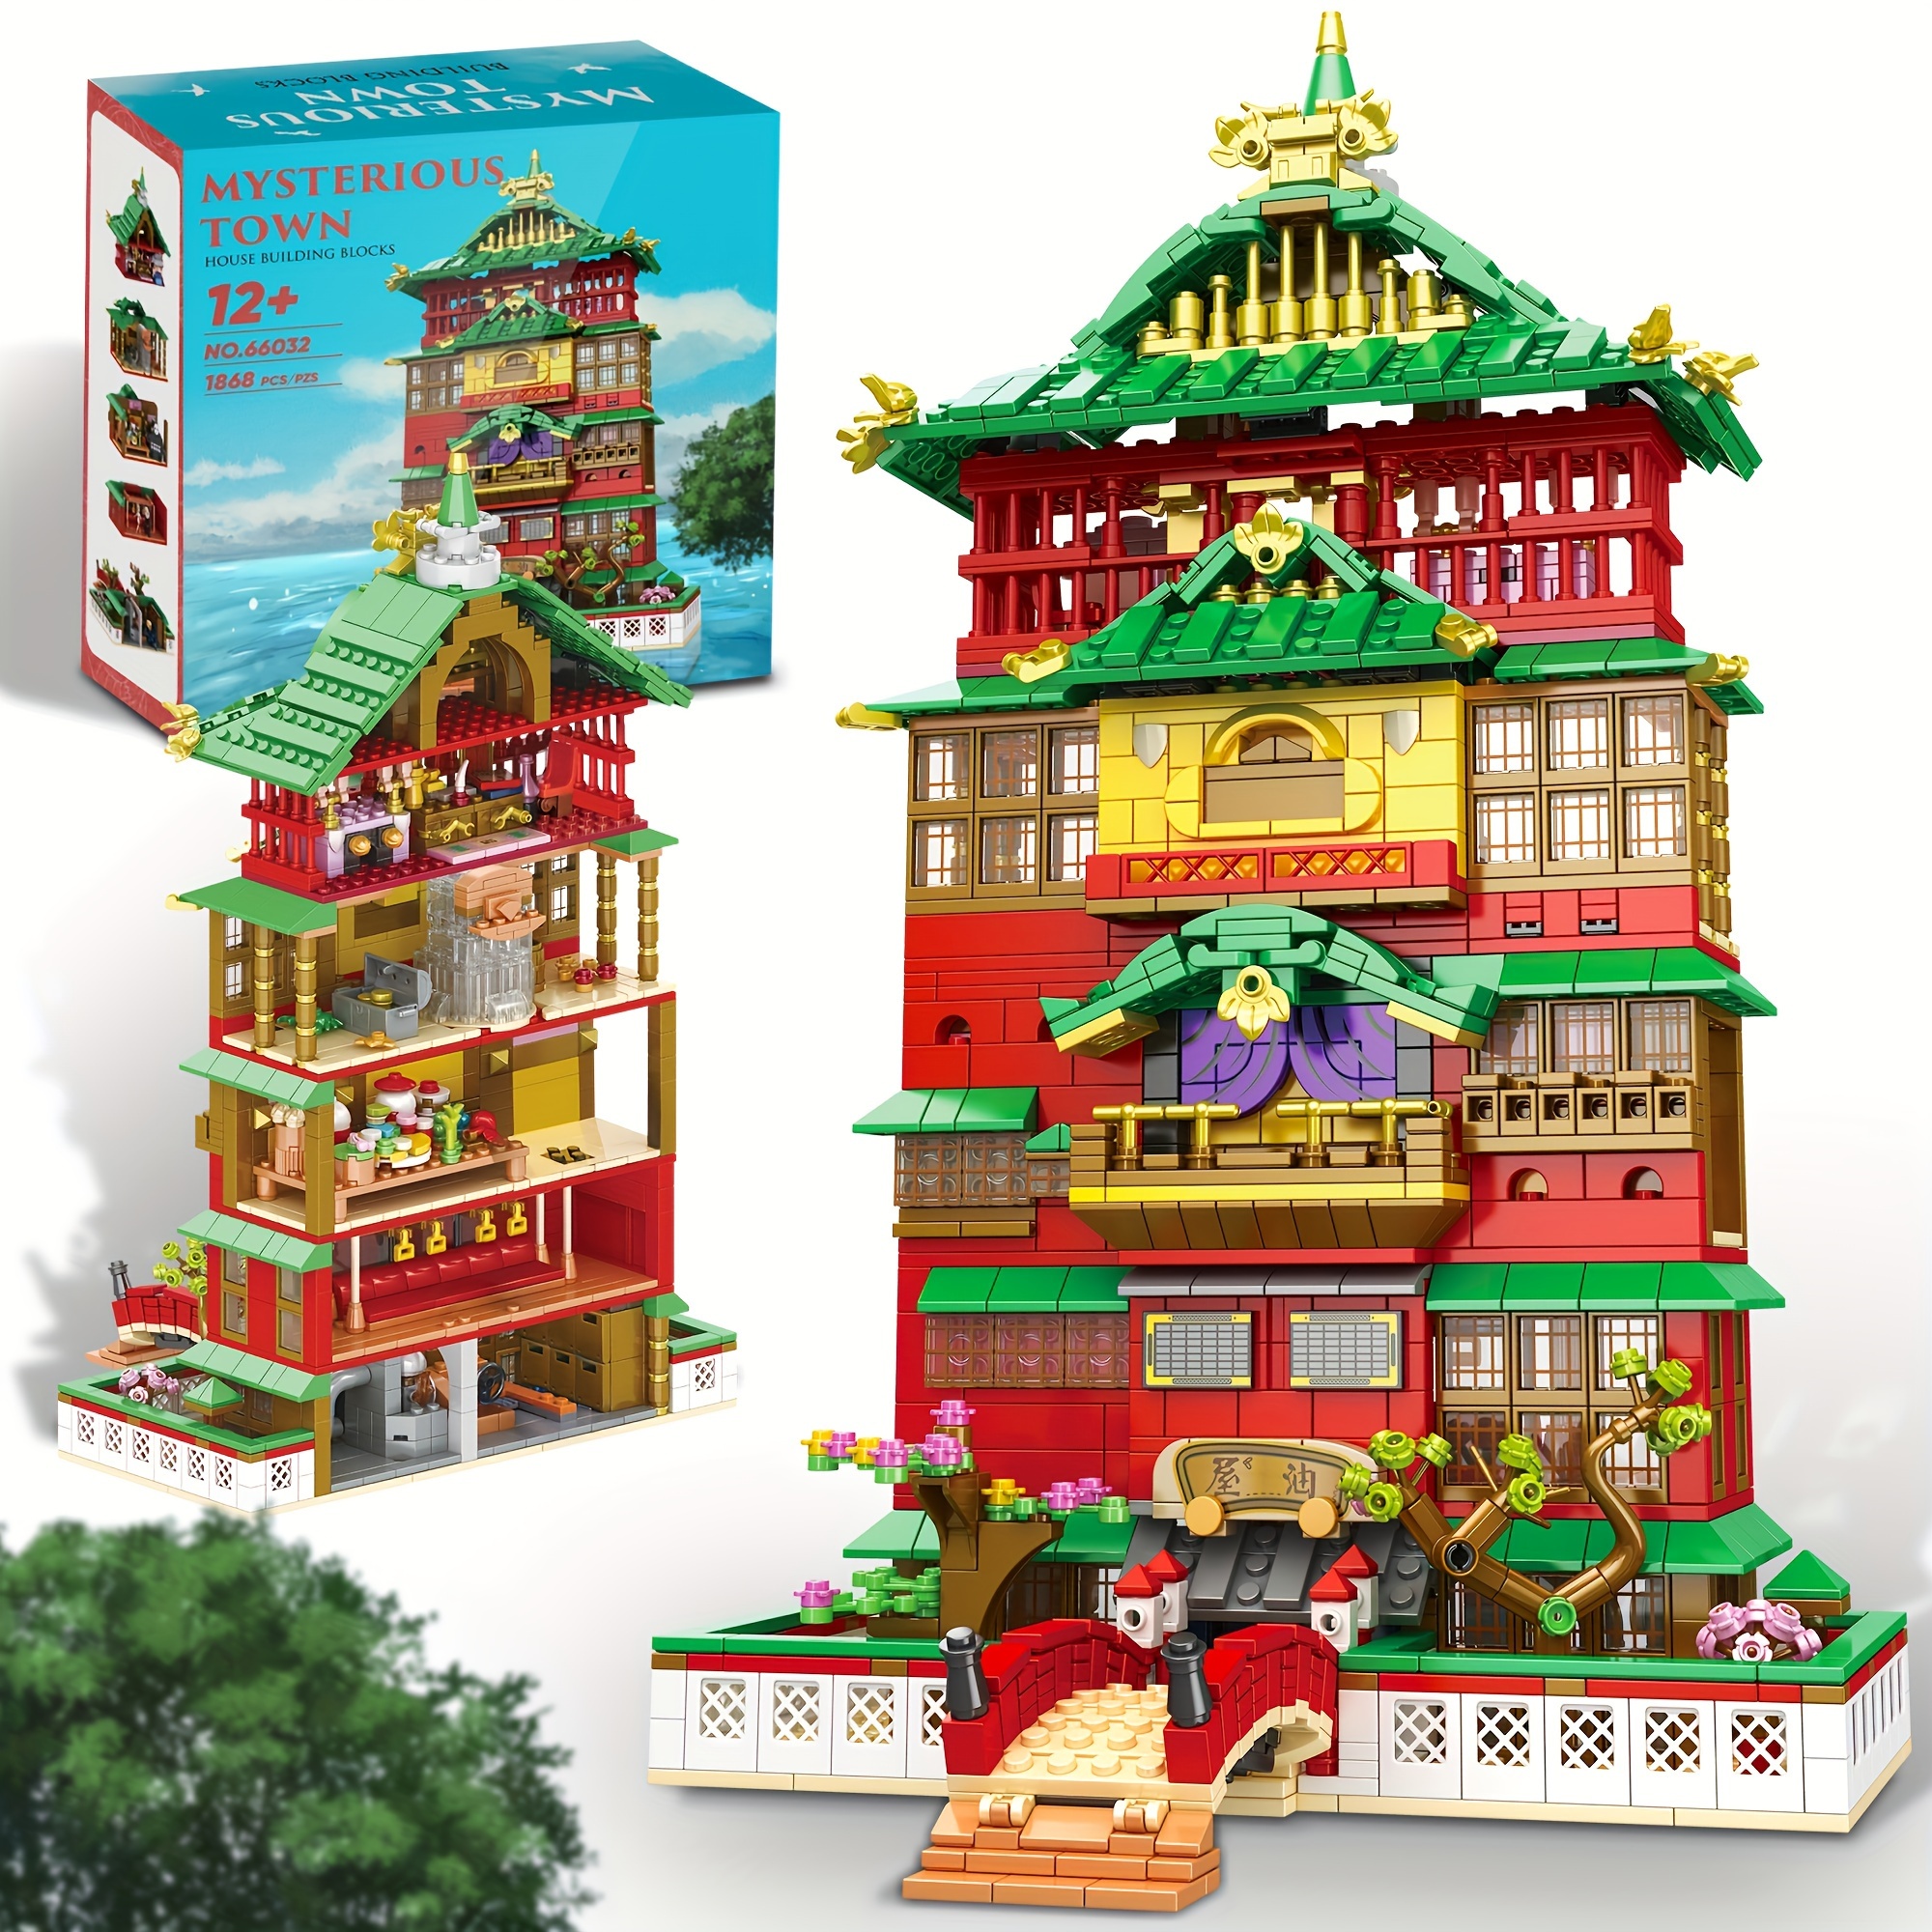 

Architecture Sets, 1868pcs Bath House Building Blocks Set With , Janpanese Street View Store Model For Adult Or Kids Anime Gifts.